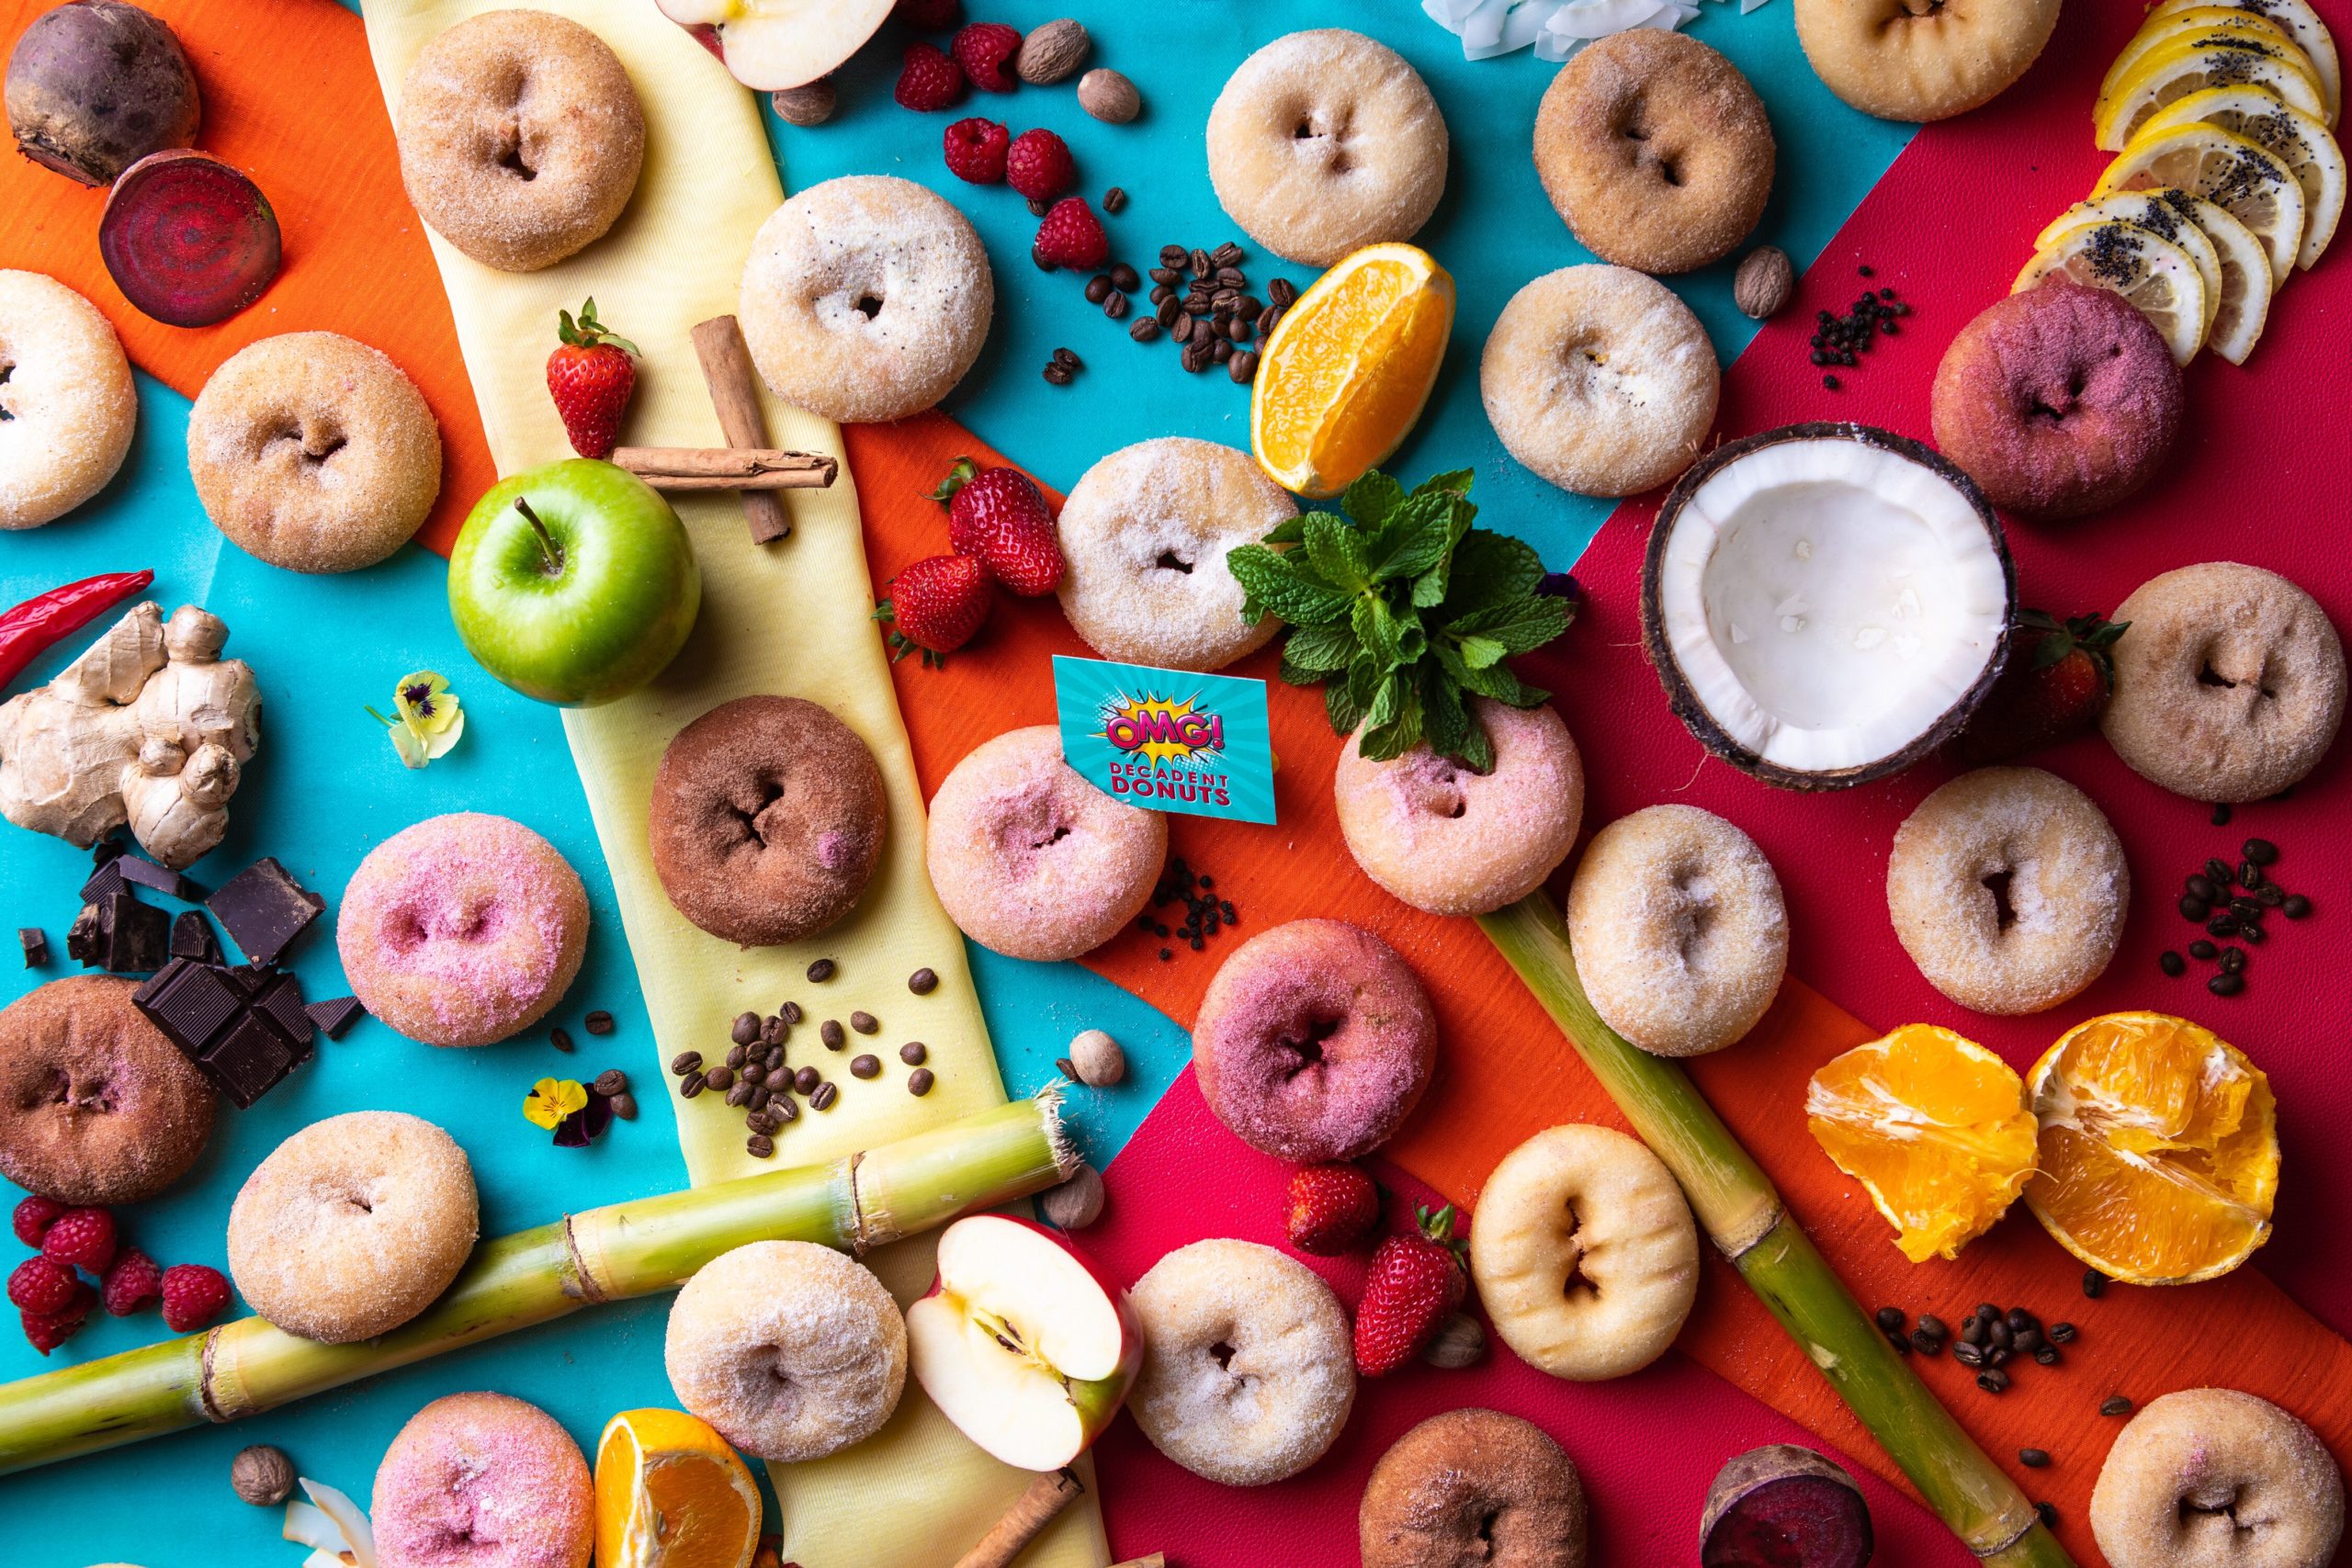 Hot Fresh Donuts that are Gluten free and Vegan - Donuts that everyone can love!